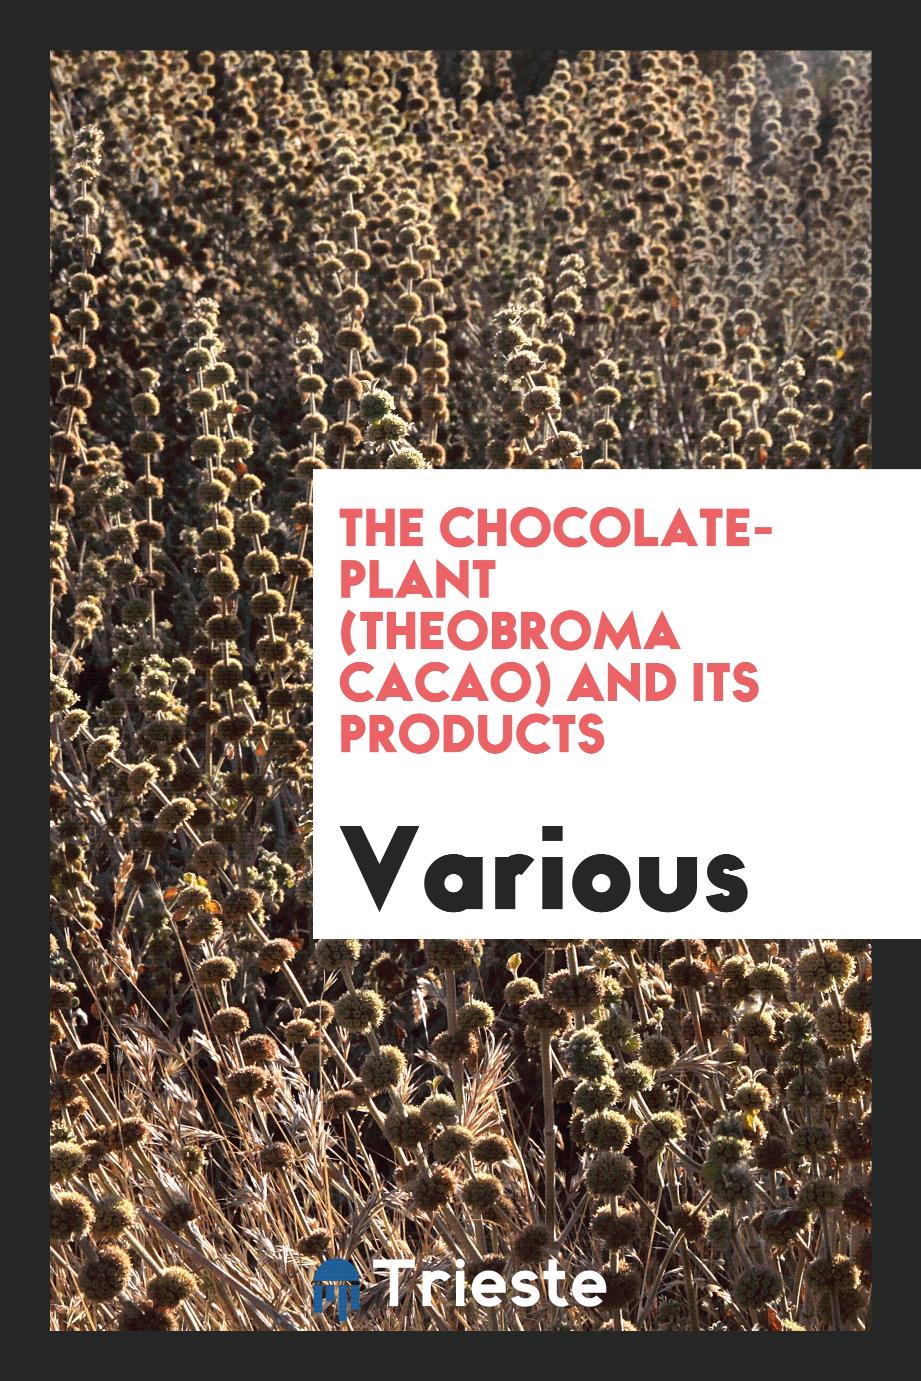 The chocolate-plant (Theobroma cacao) and its products